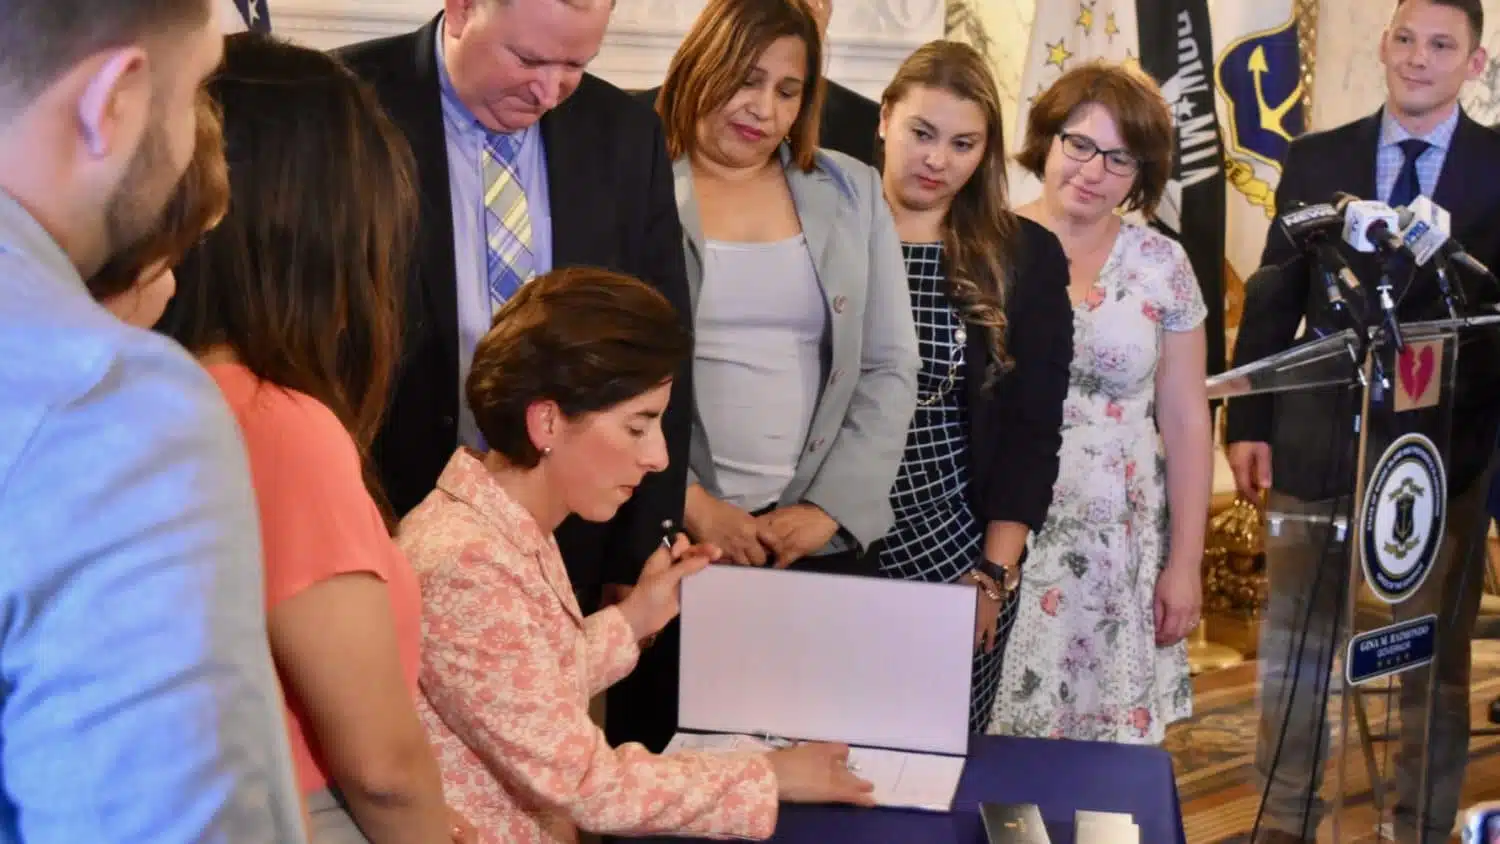 Rhode Island passes law protecting DACA recipients’ ability to obtain drivers licenses